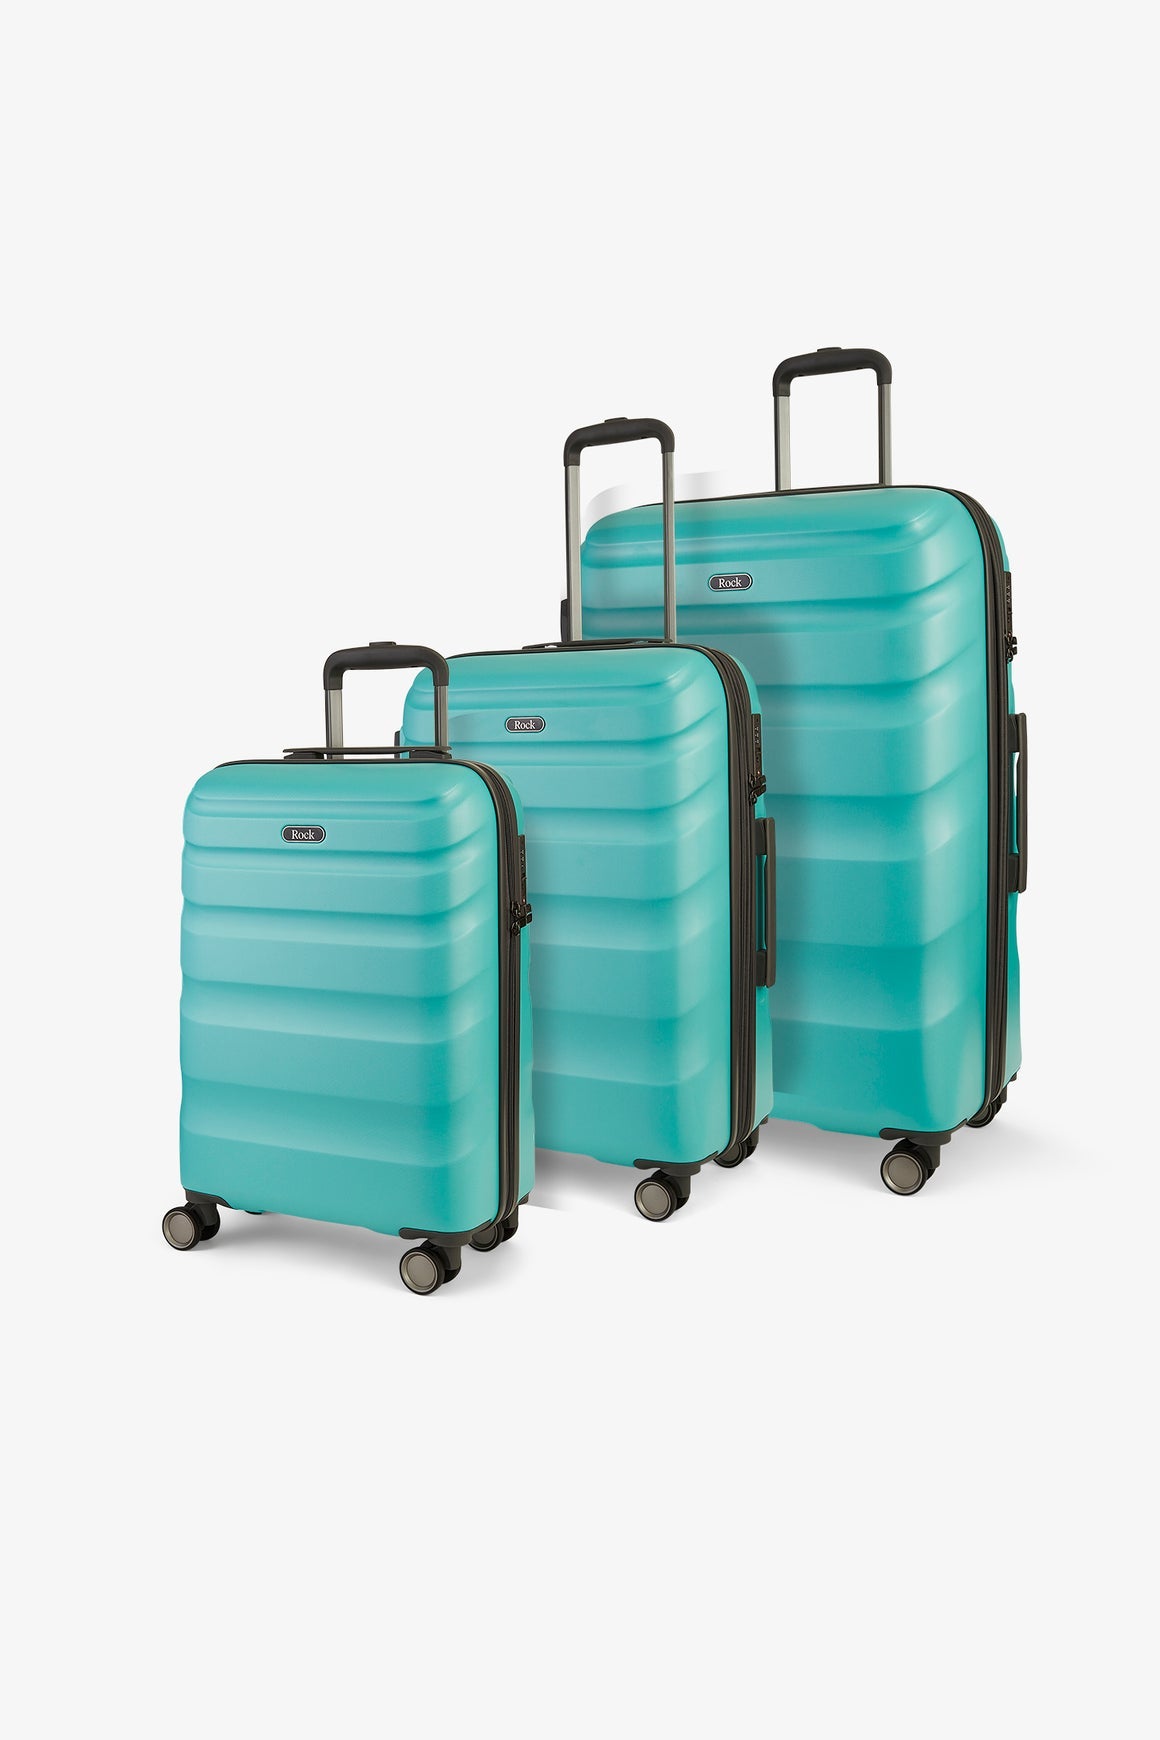 Bali Set of 3 Suitcases